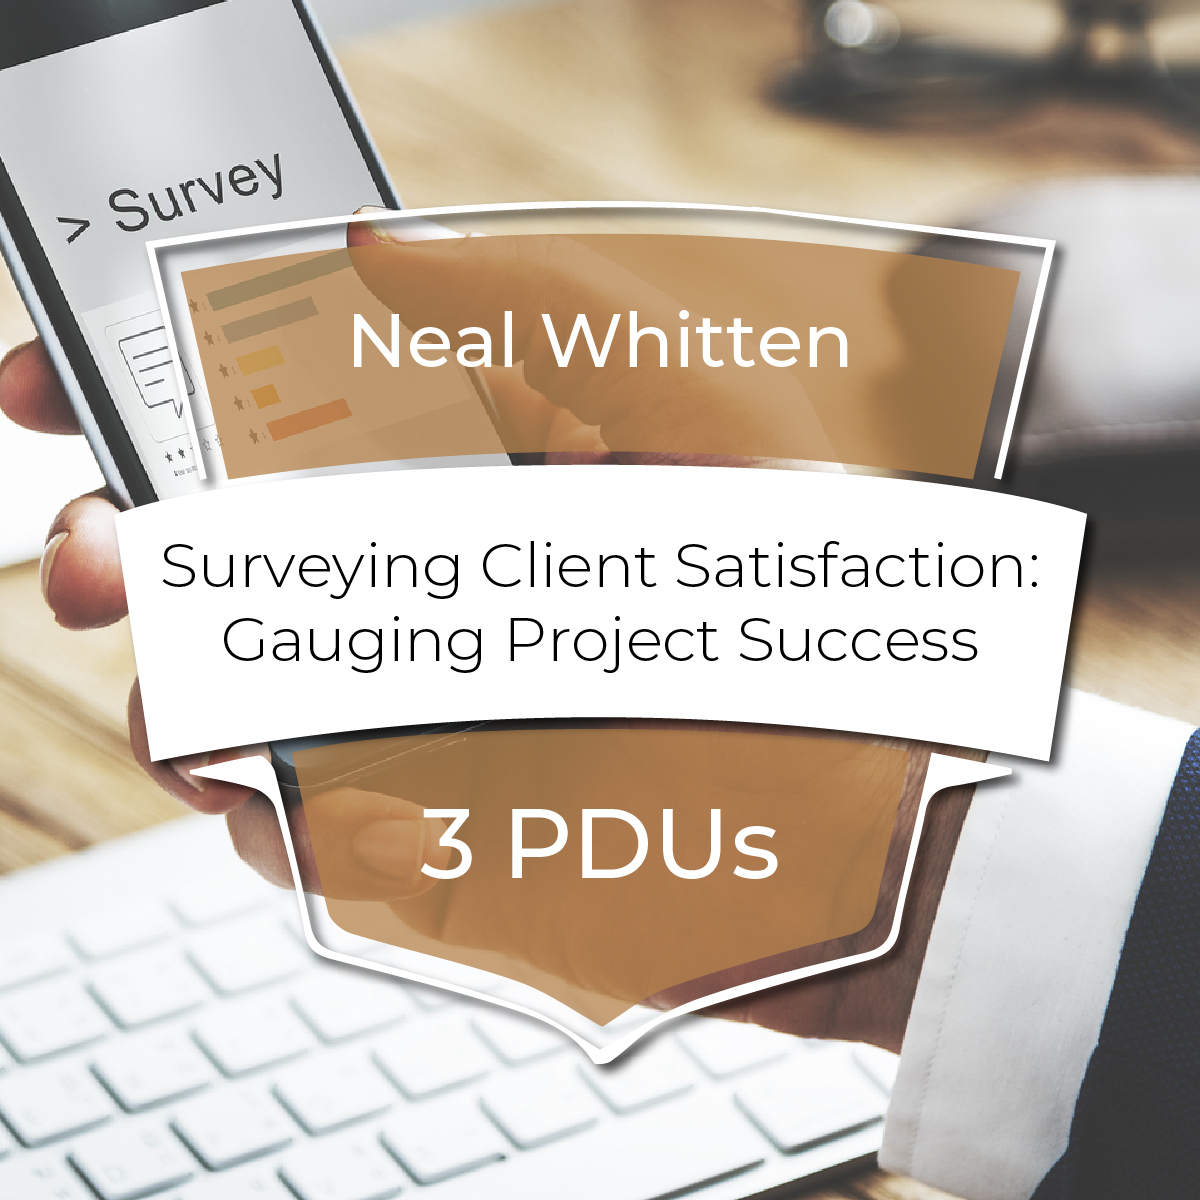 Surveying Client Satisfaction: Gauging Project Success